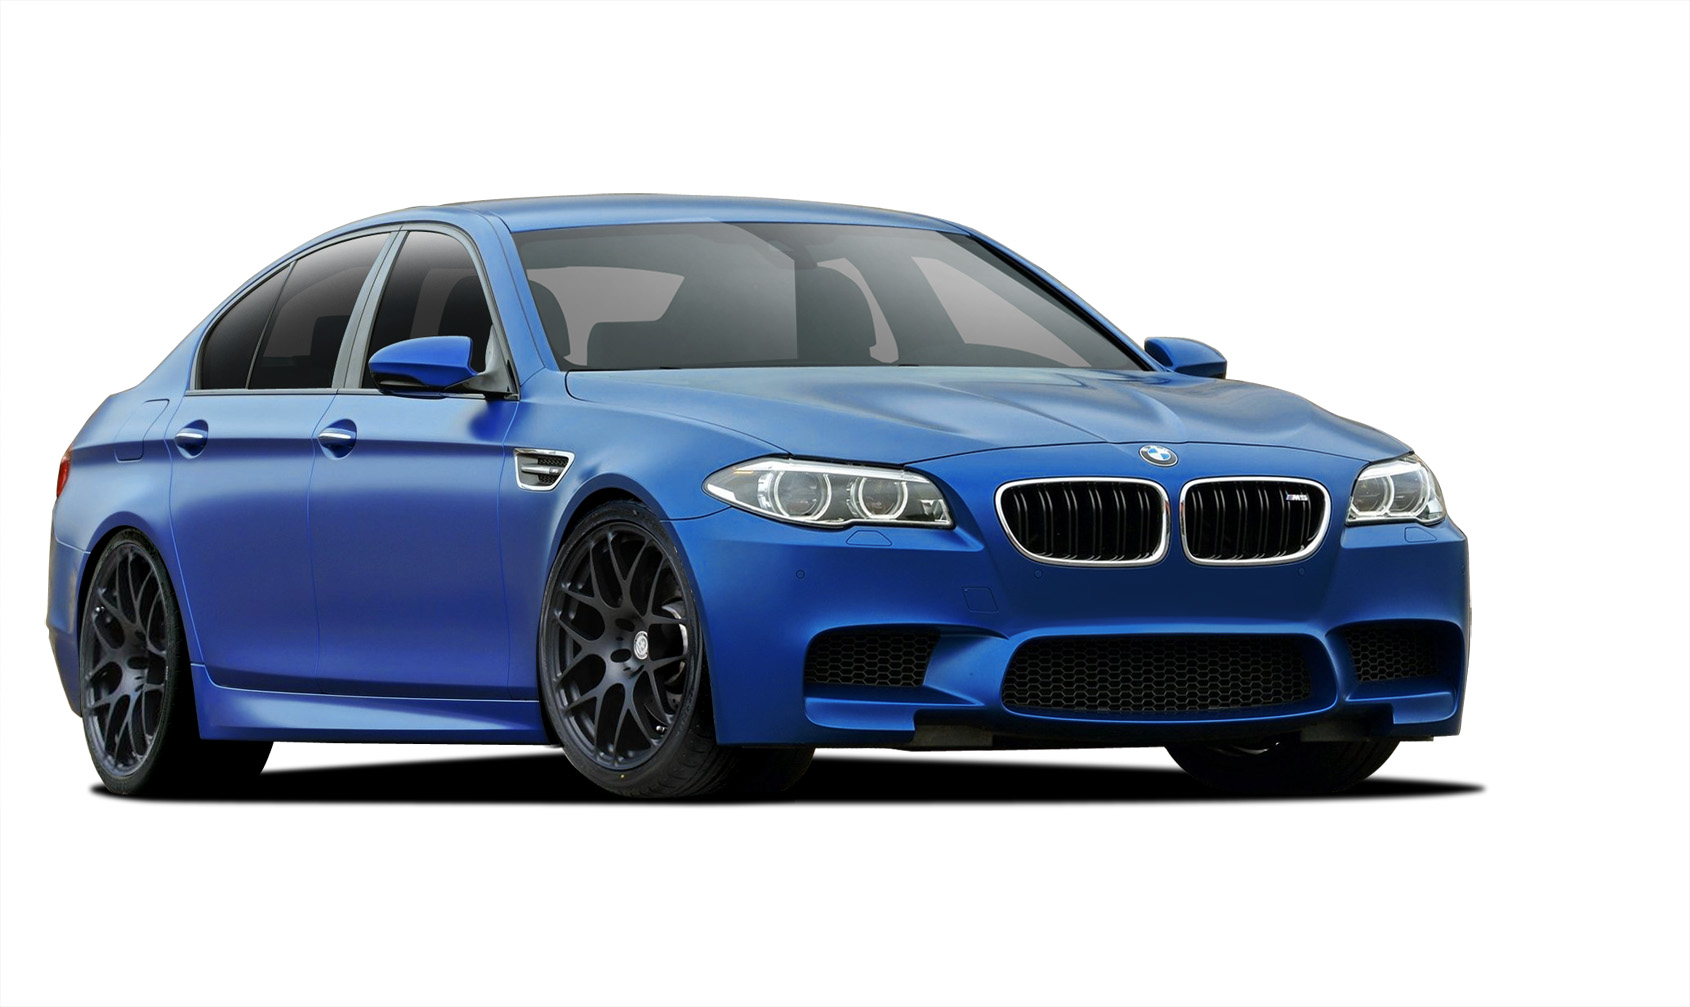 2016 BMW 5 Series 4DR - Polypropylene Body Kit Bodykit - BMW 5 Series F10 Vaero M5 Look Conversion Kit ( with PDC , with Washer , without Camera ) - 6